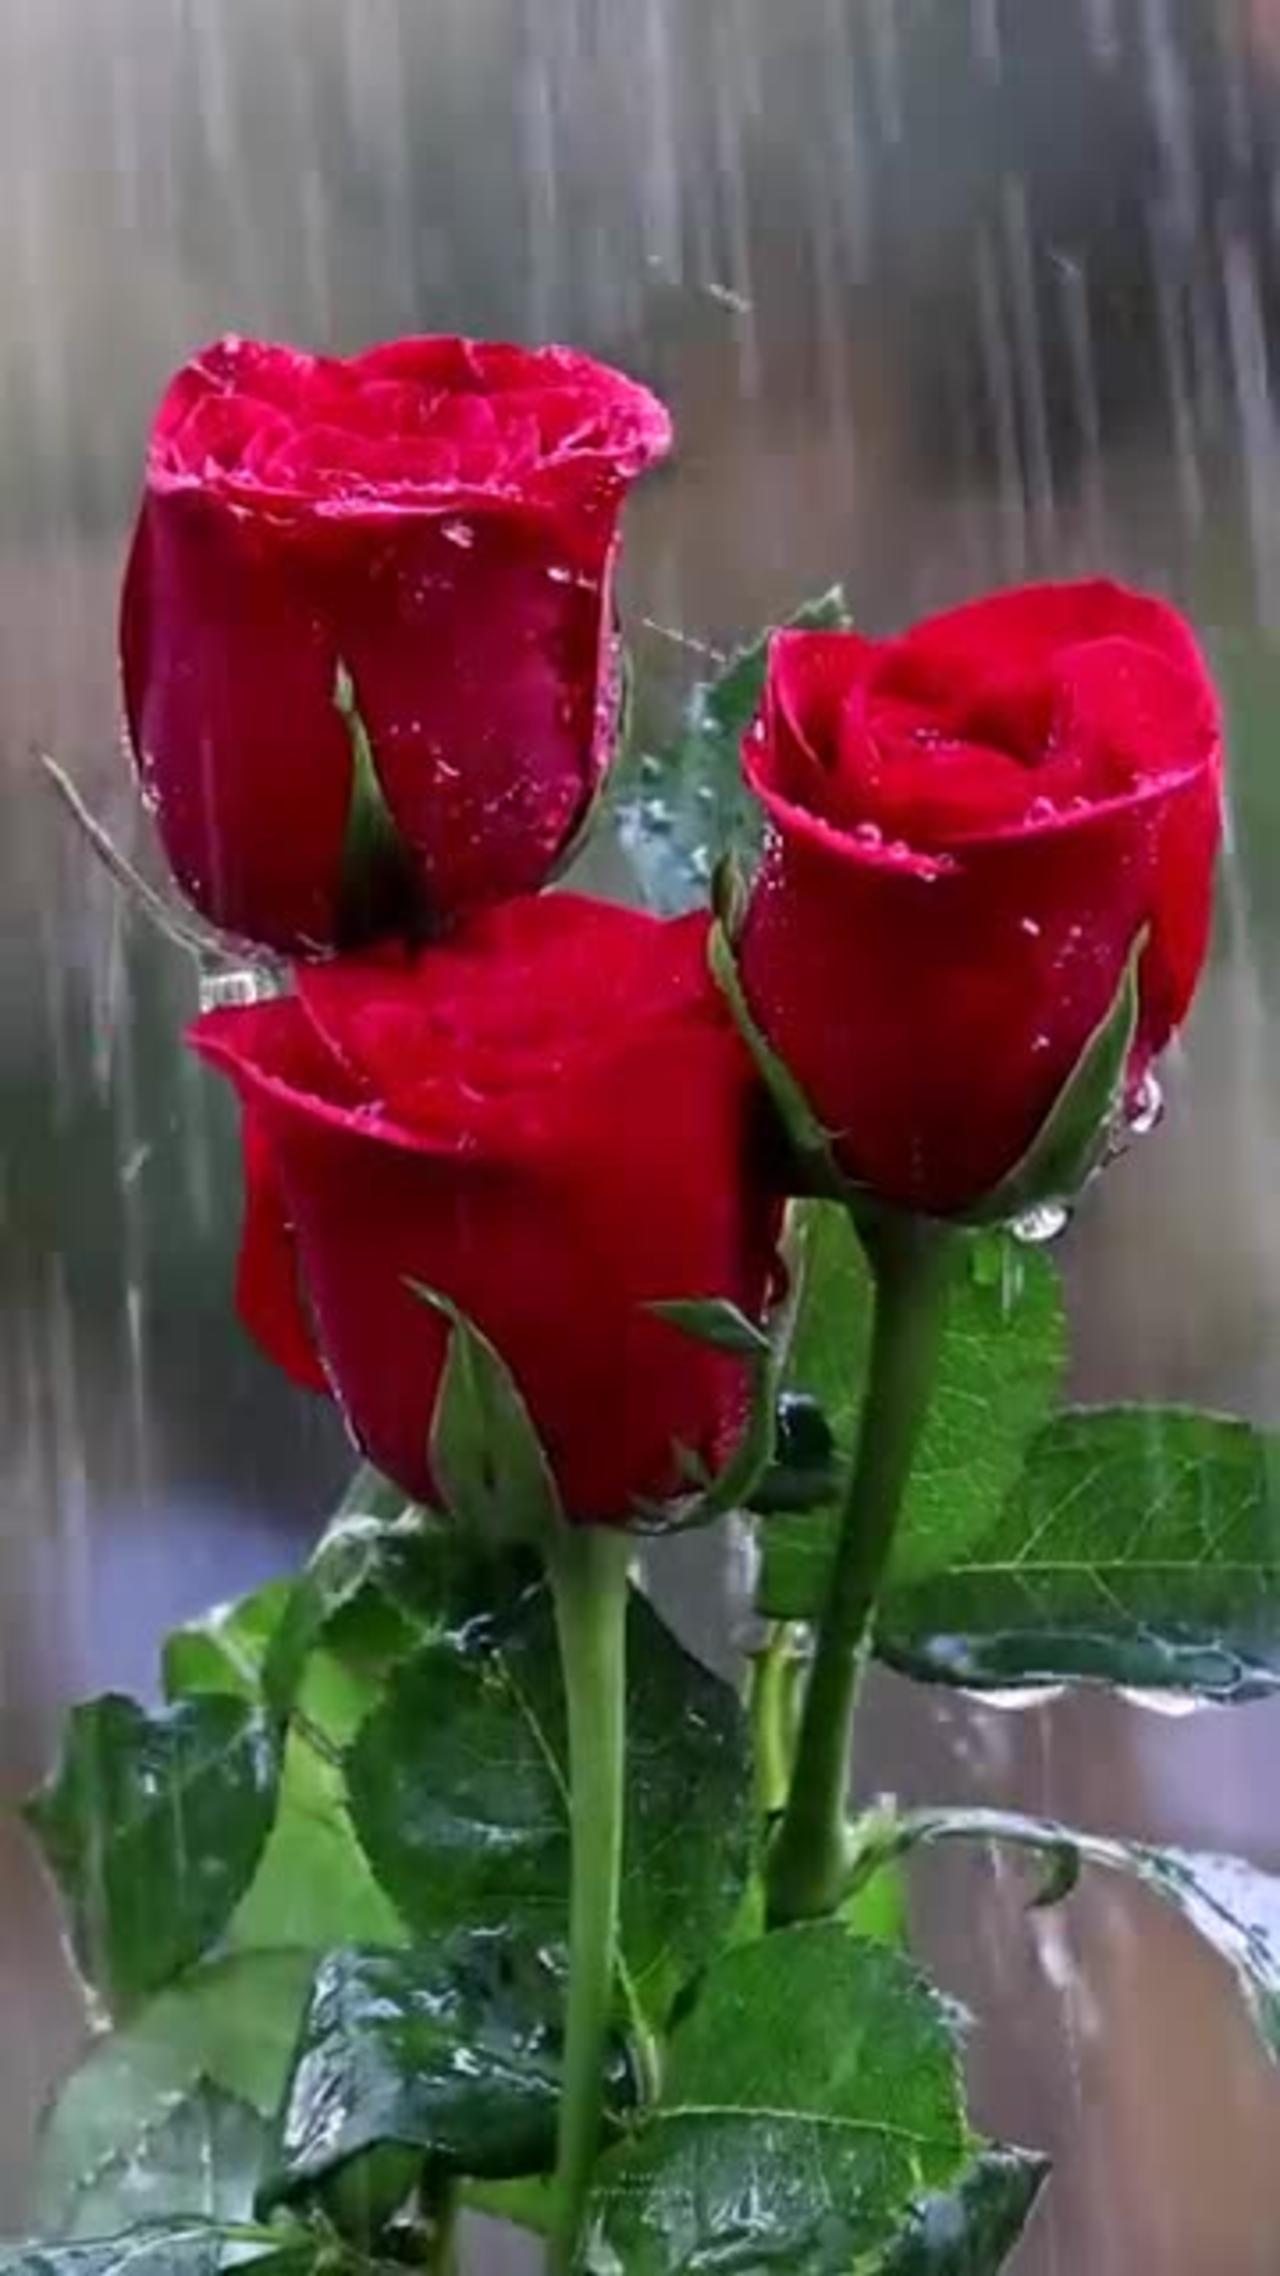 Rain on Beautiful Flower To See And Enjoy